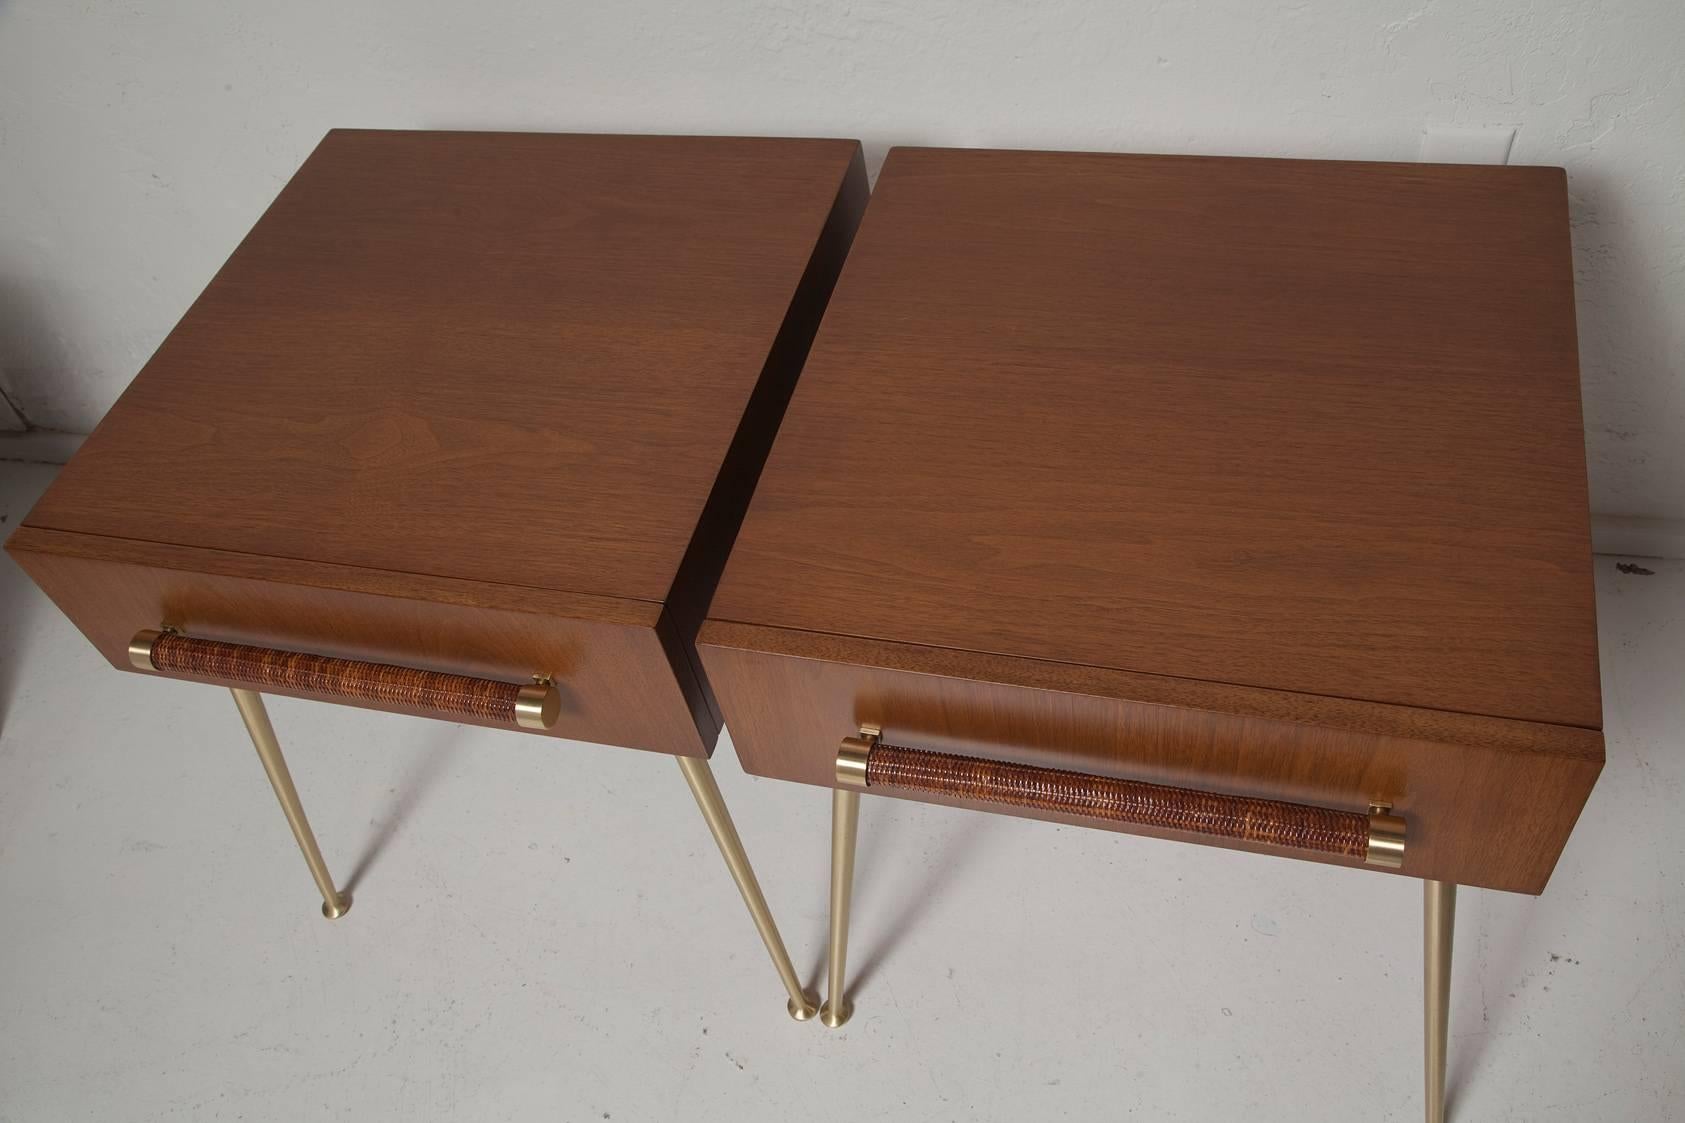 American Fully Restored End Tables or Nightstands by T.H. Robsjohn-Gibbings for Widdicomb